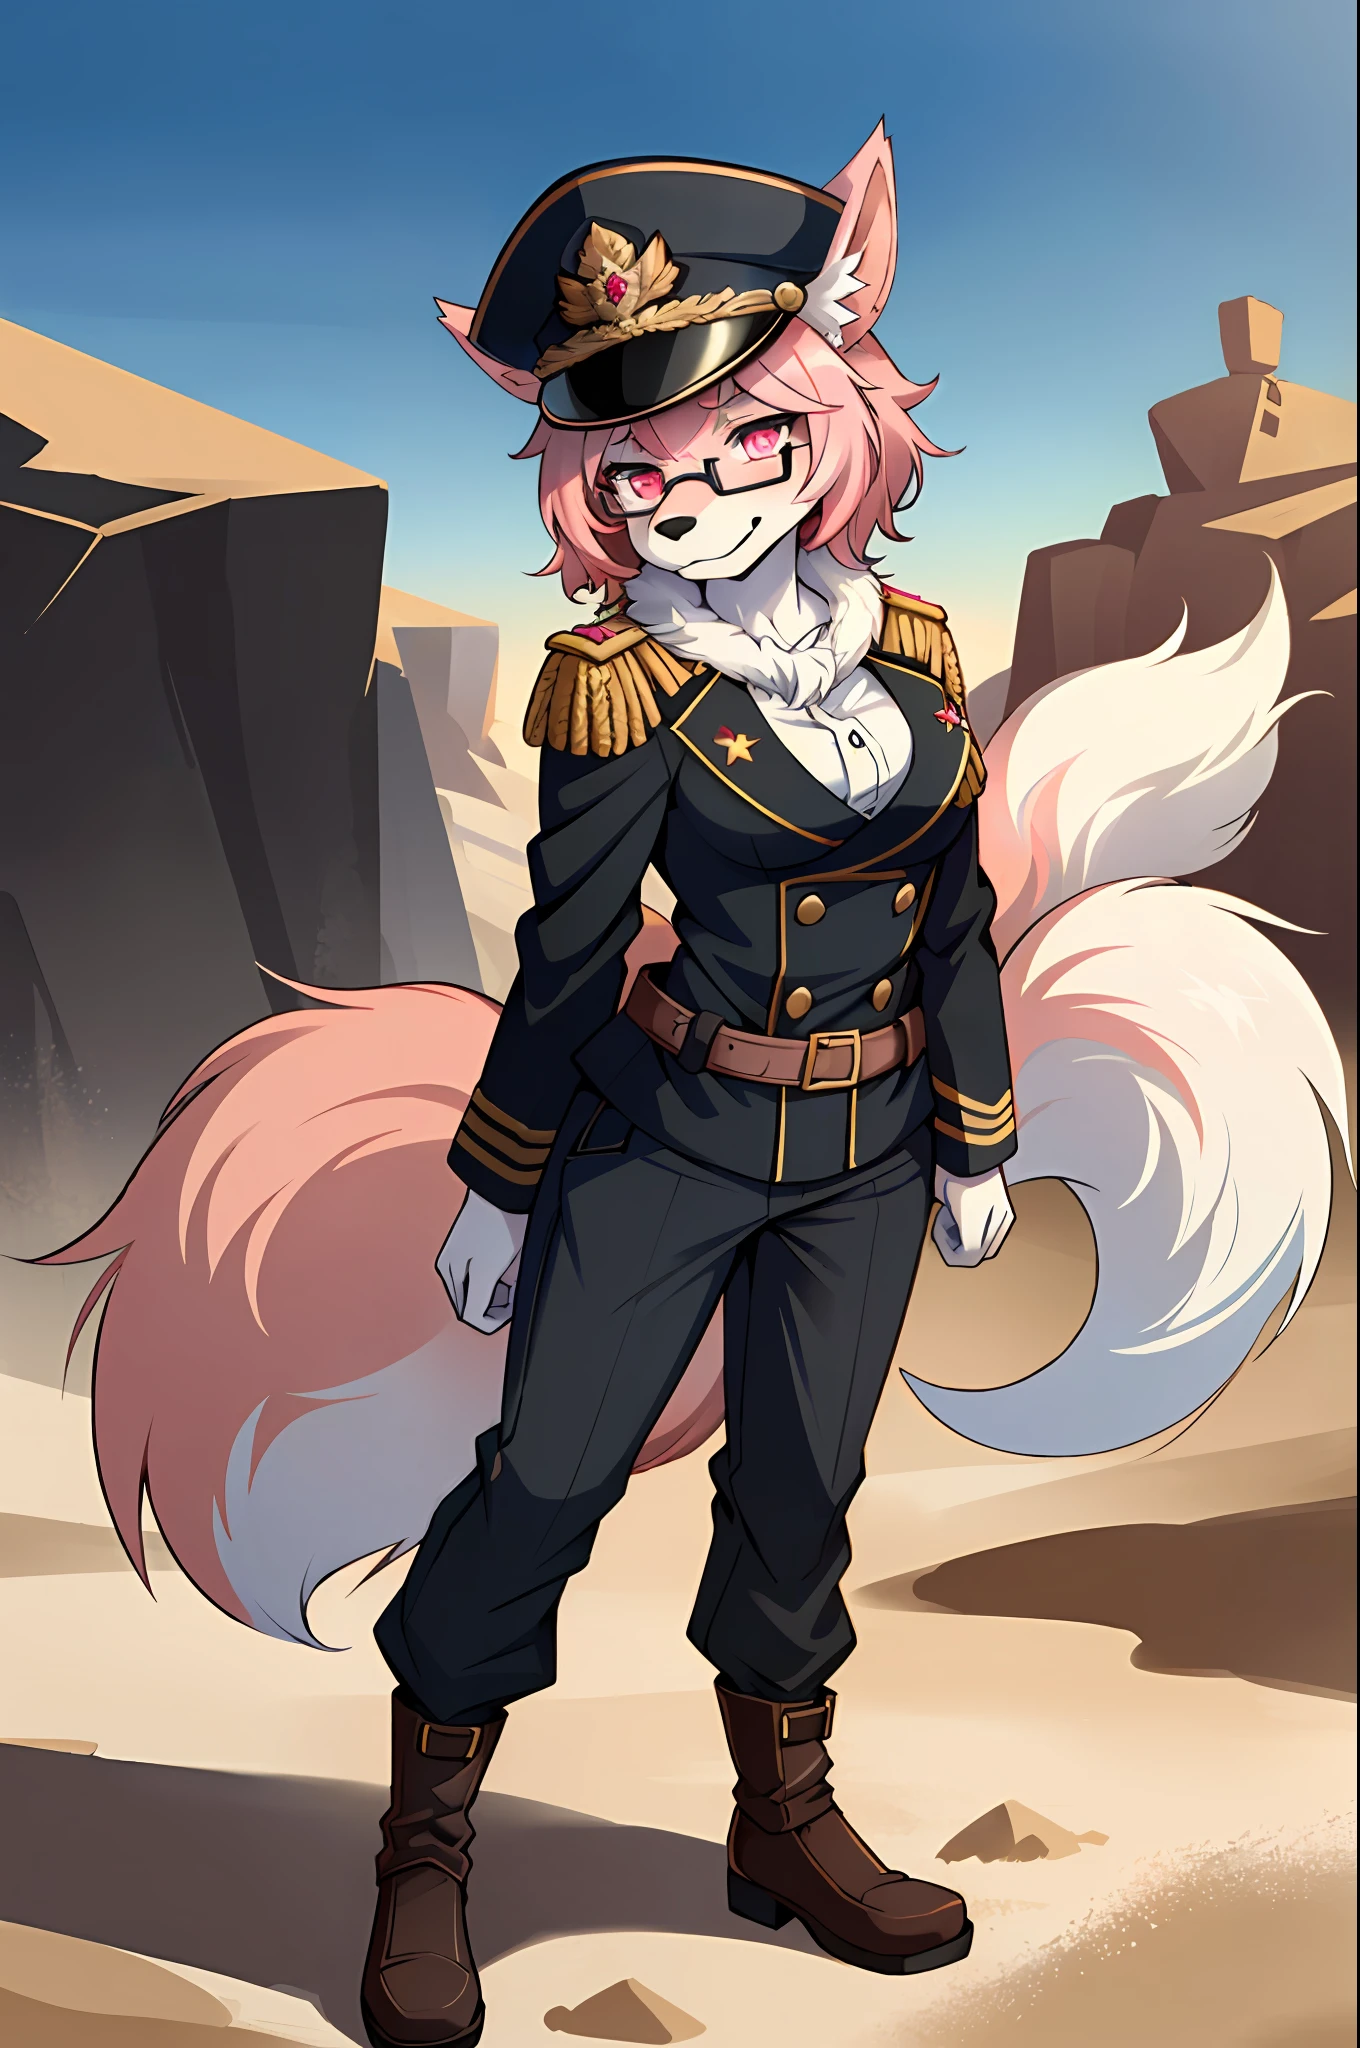 (masterpiece, best quality)), (Anthro Furry:1.3, muzzle:1.2, Anthro:1.3, furry:1.2, closeup:1.2, female solo:1.2, (wearing Russian military coat), standing, sexy body position, military pants, wearing glasses, Fox spiraled in the colors of Funtime Foxy,five nights at freddy,white skin pink details, pink eyes, pink hair, , sexy position, desert environment place, Russian general military hat,  Spiral art style in furry Vixens